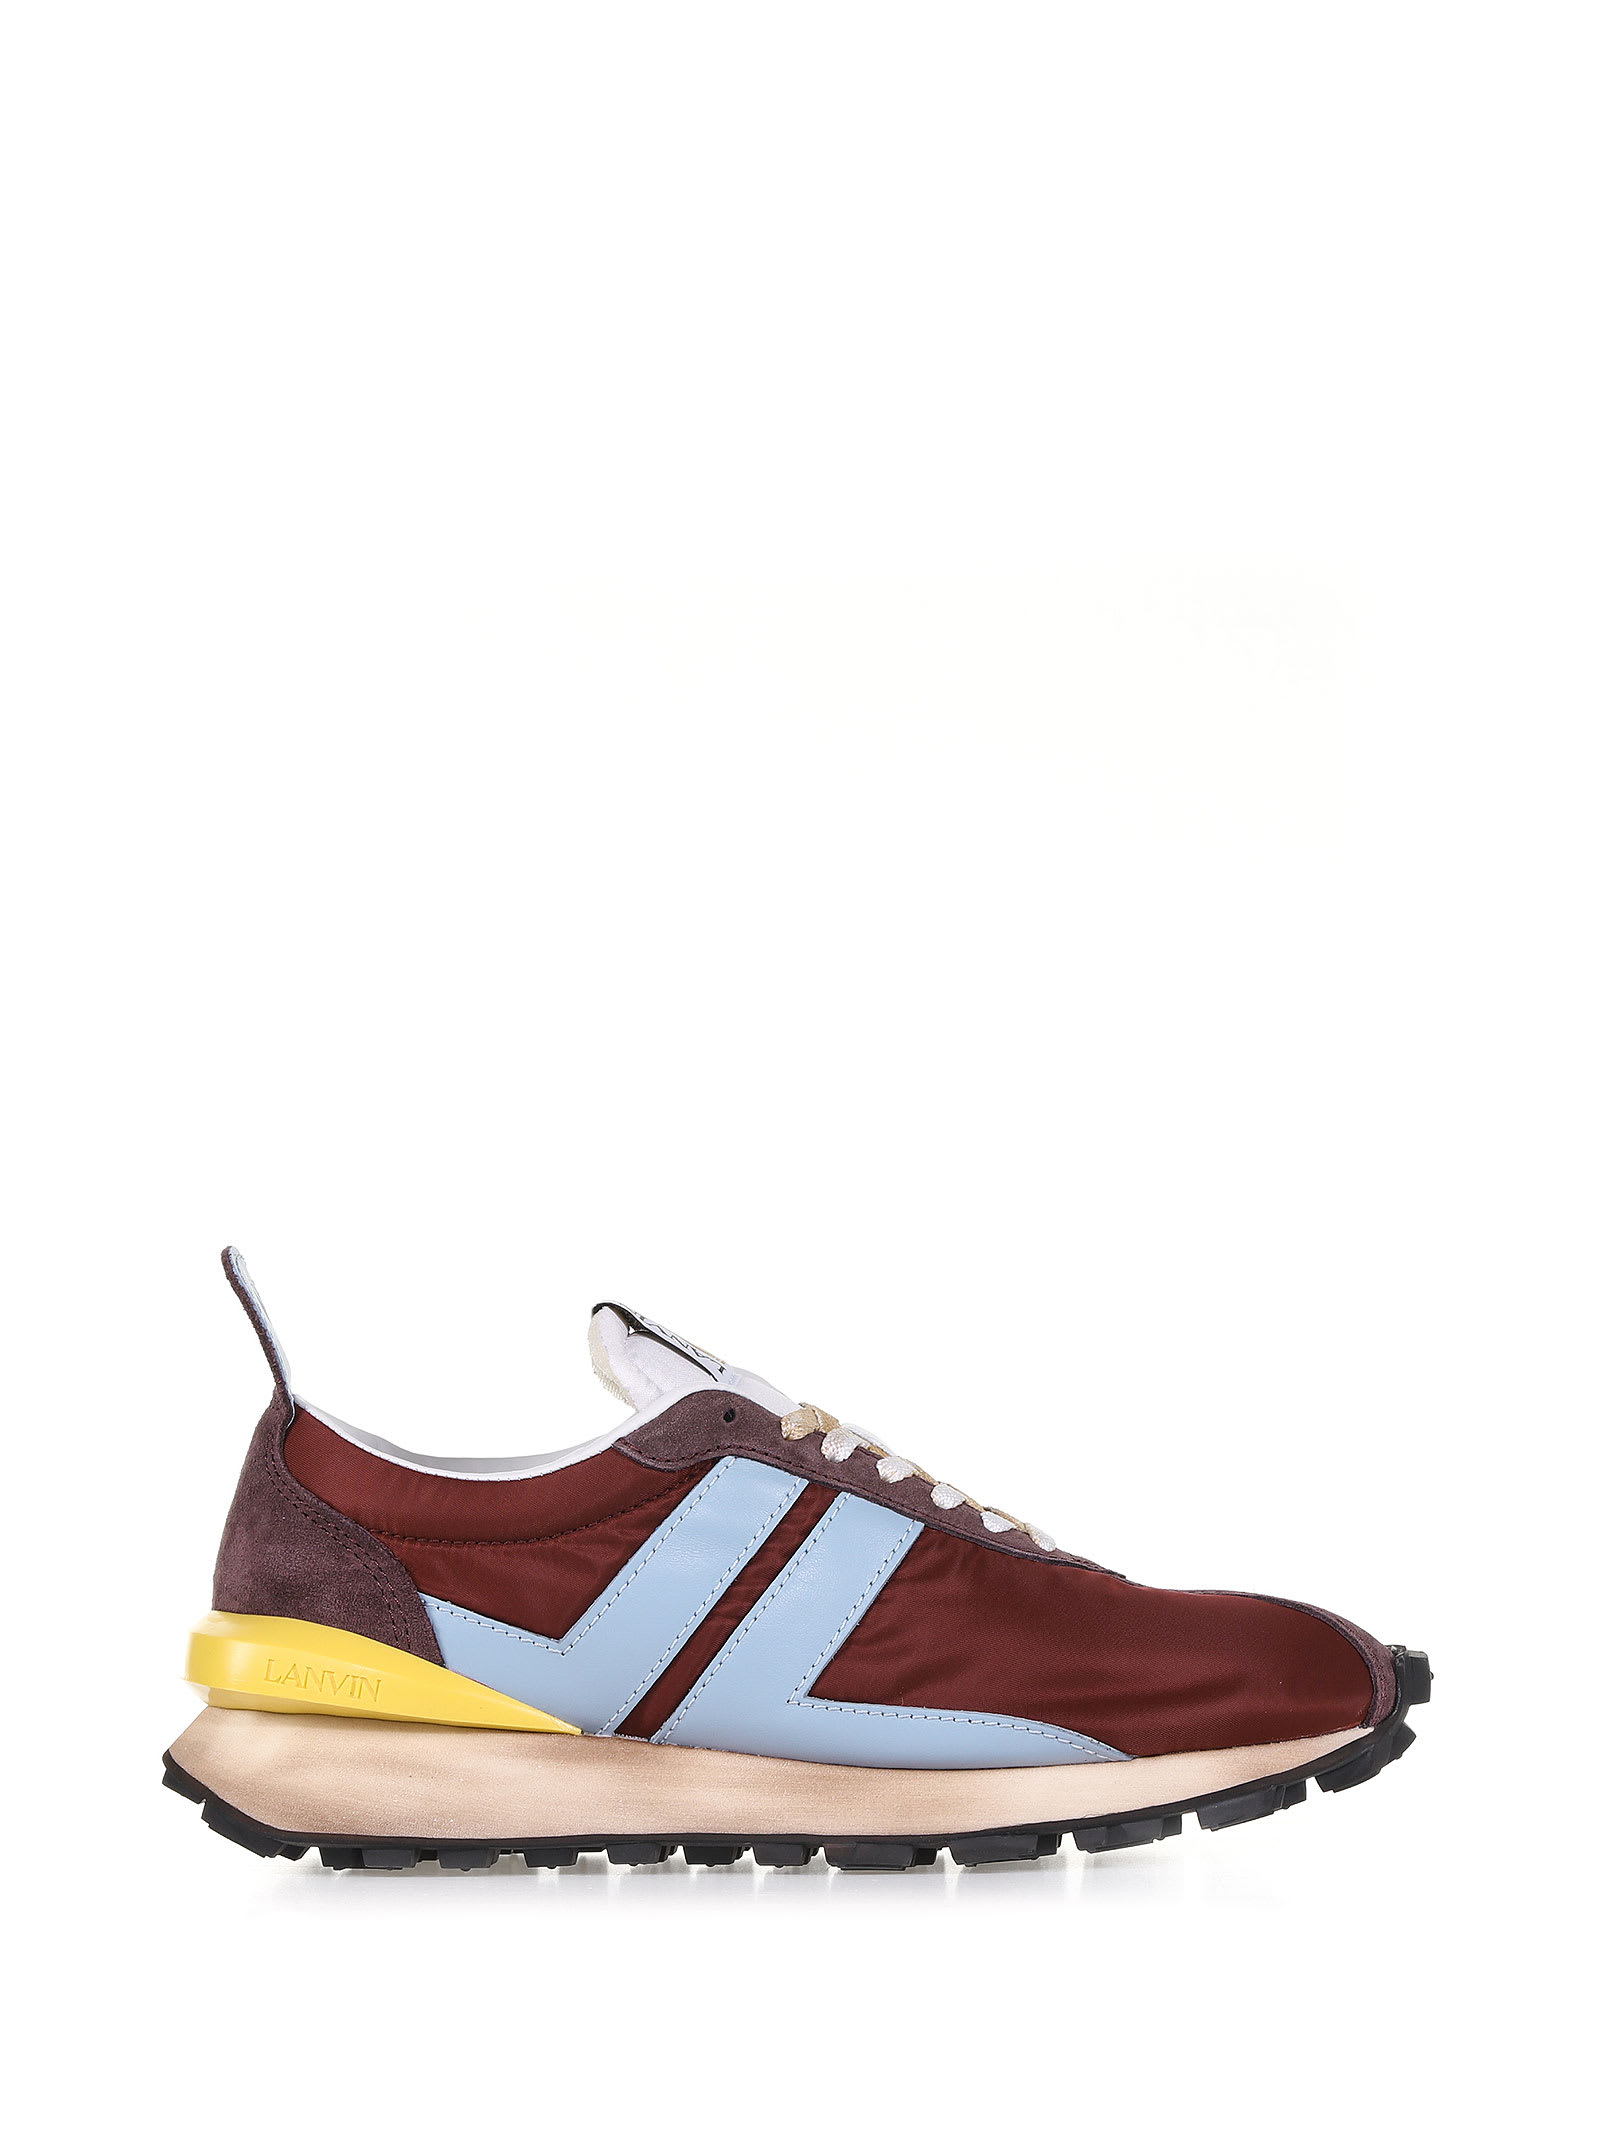 Lanvin Running Sneaker With Lateral Logo